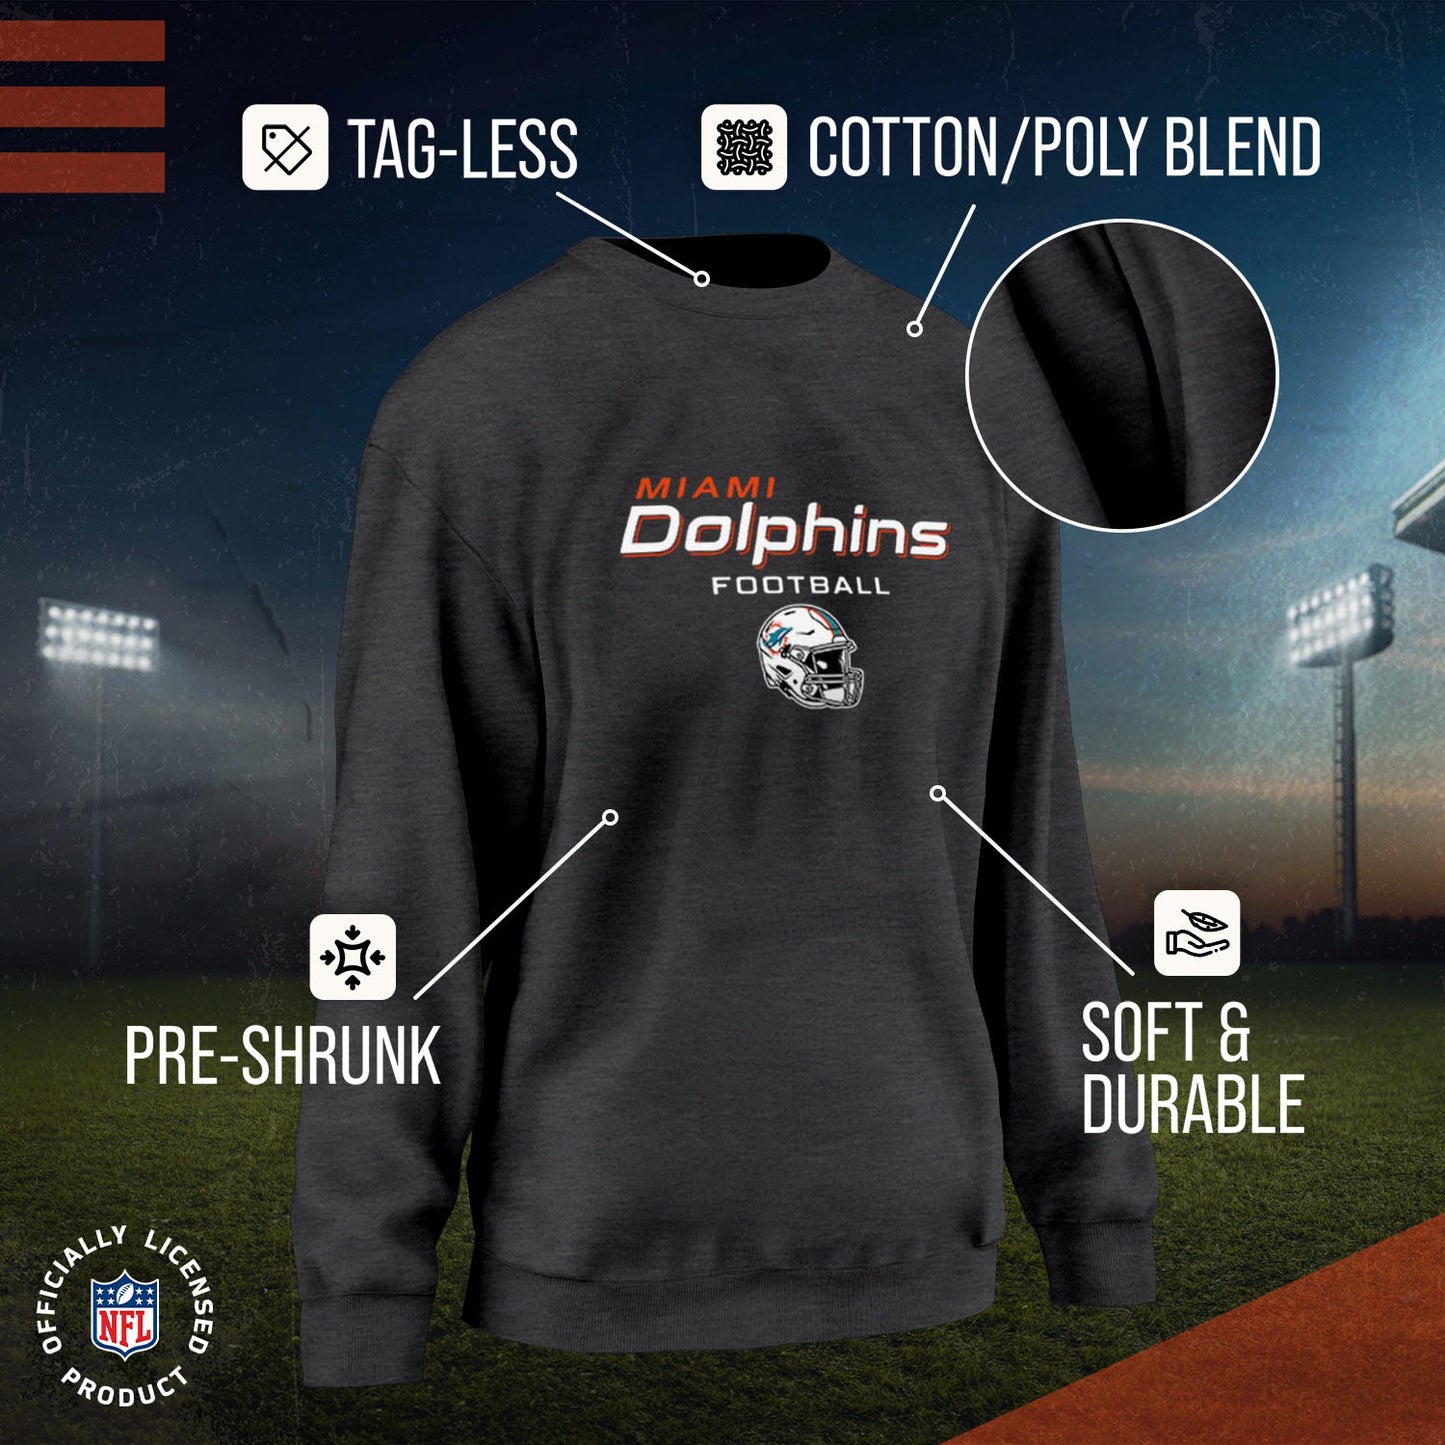 Miami Dolphins Women's NFL Football Helmet Charcoal Slouchy Crewneck -Tagless Lightweight Pullover - Charcoal